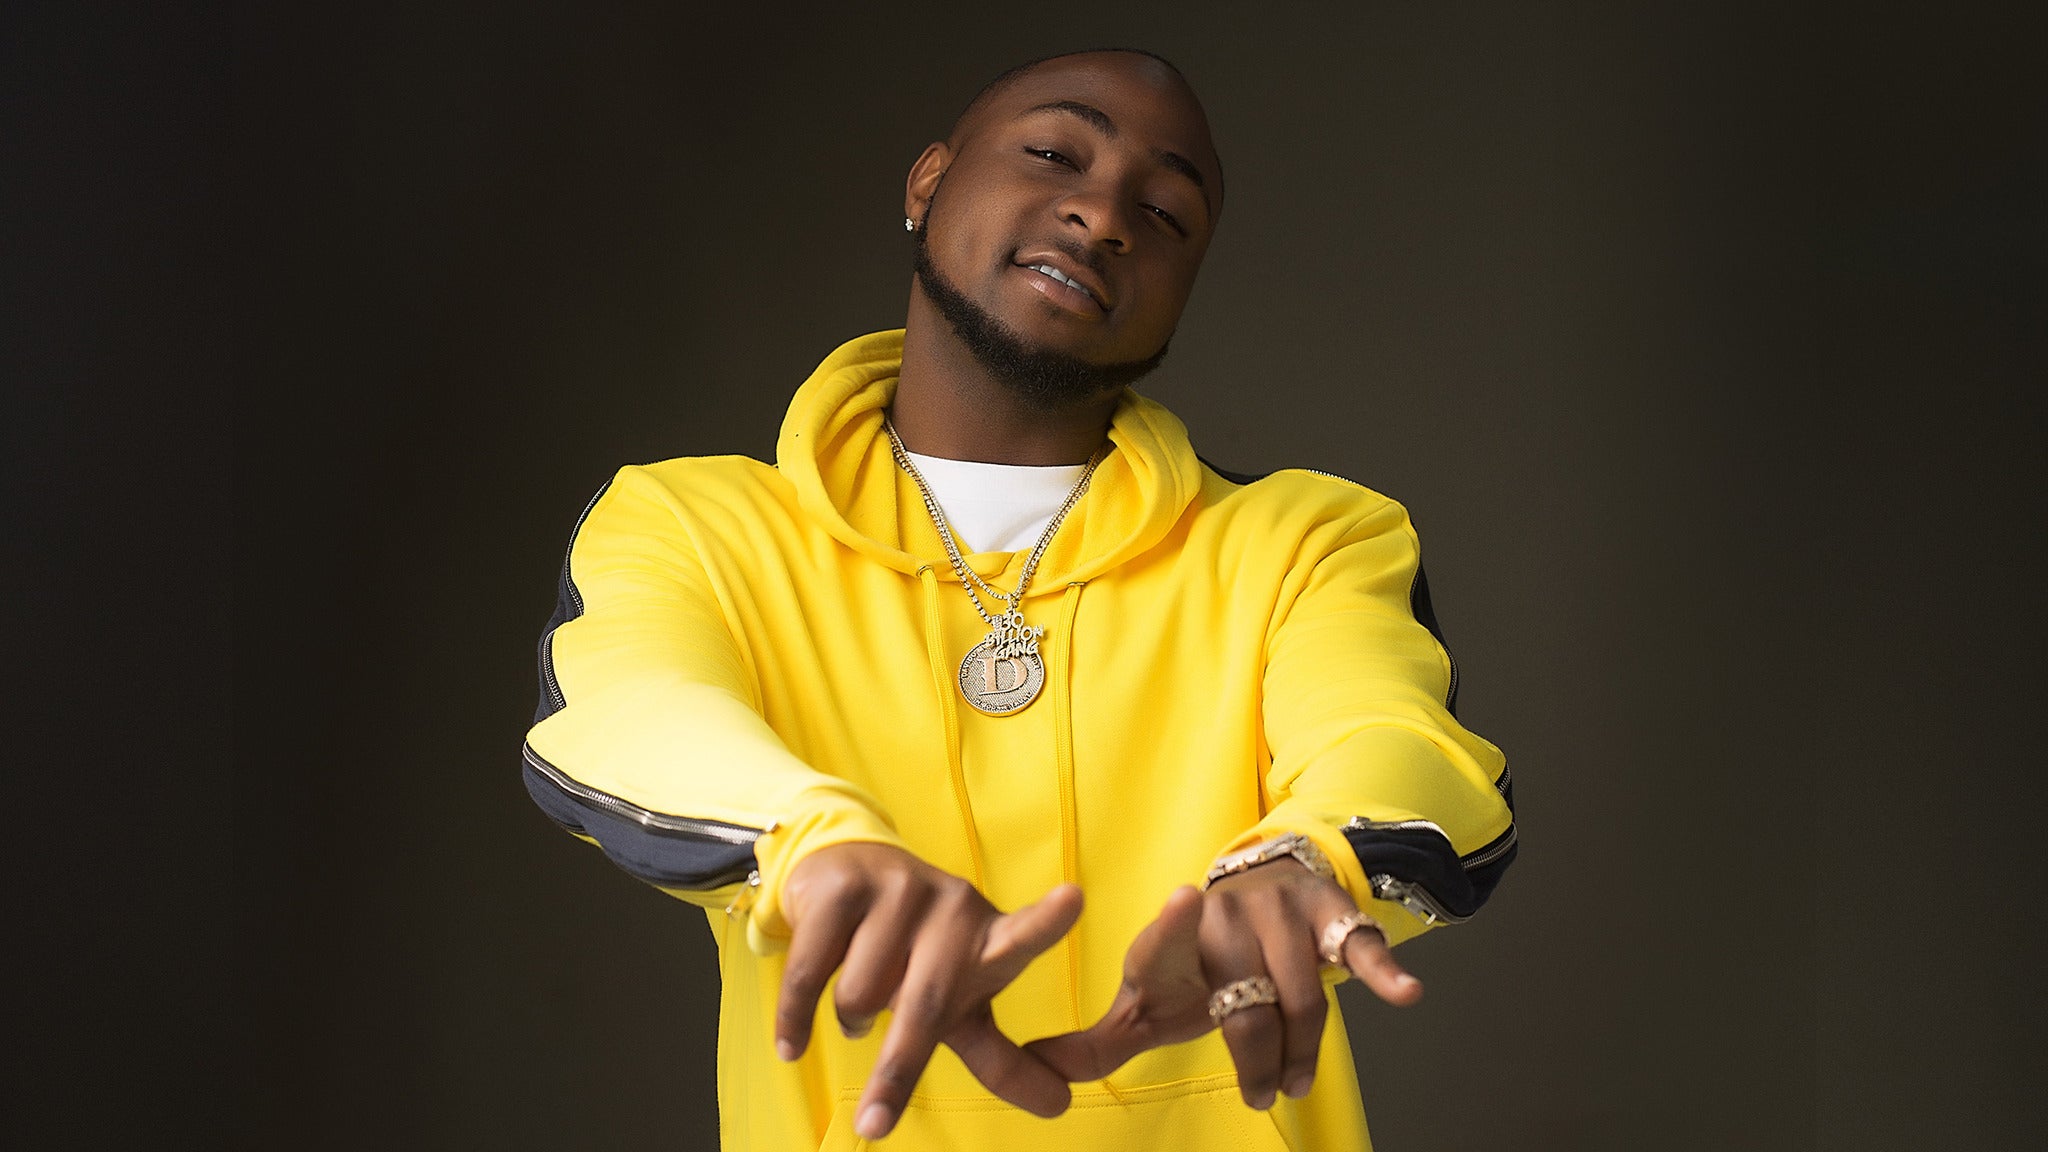 DaVido - A Good Time Tour in Los Angeles promo photo for Official Platinum presale offer code